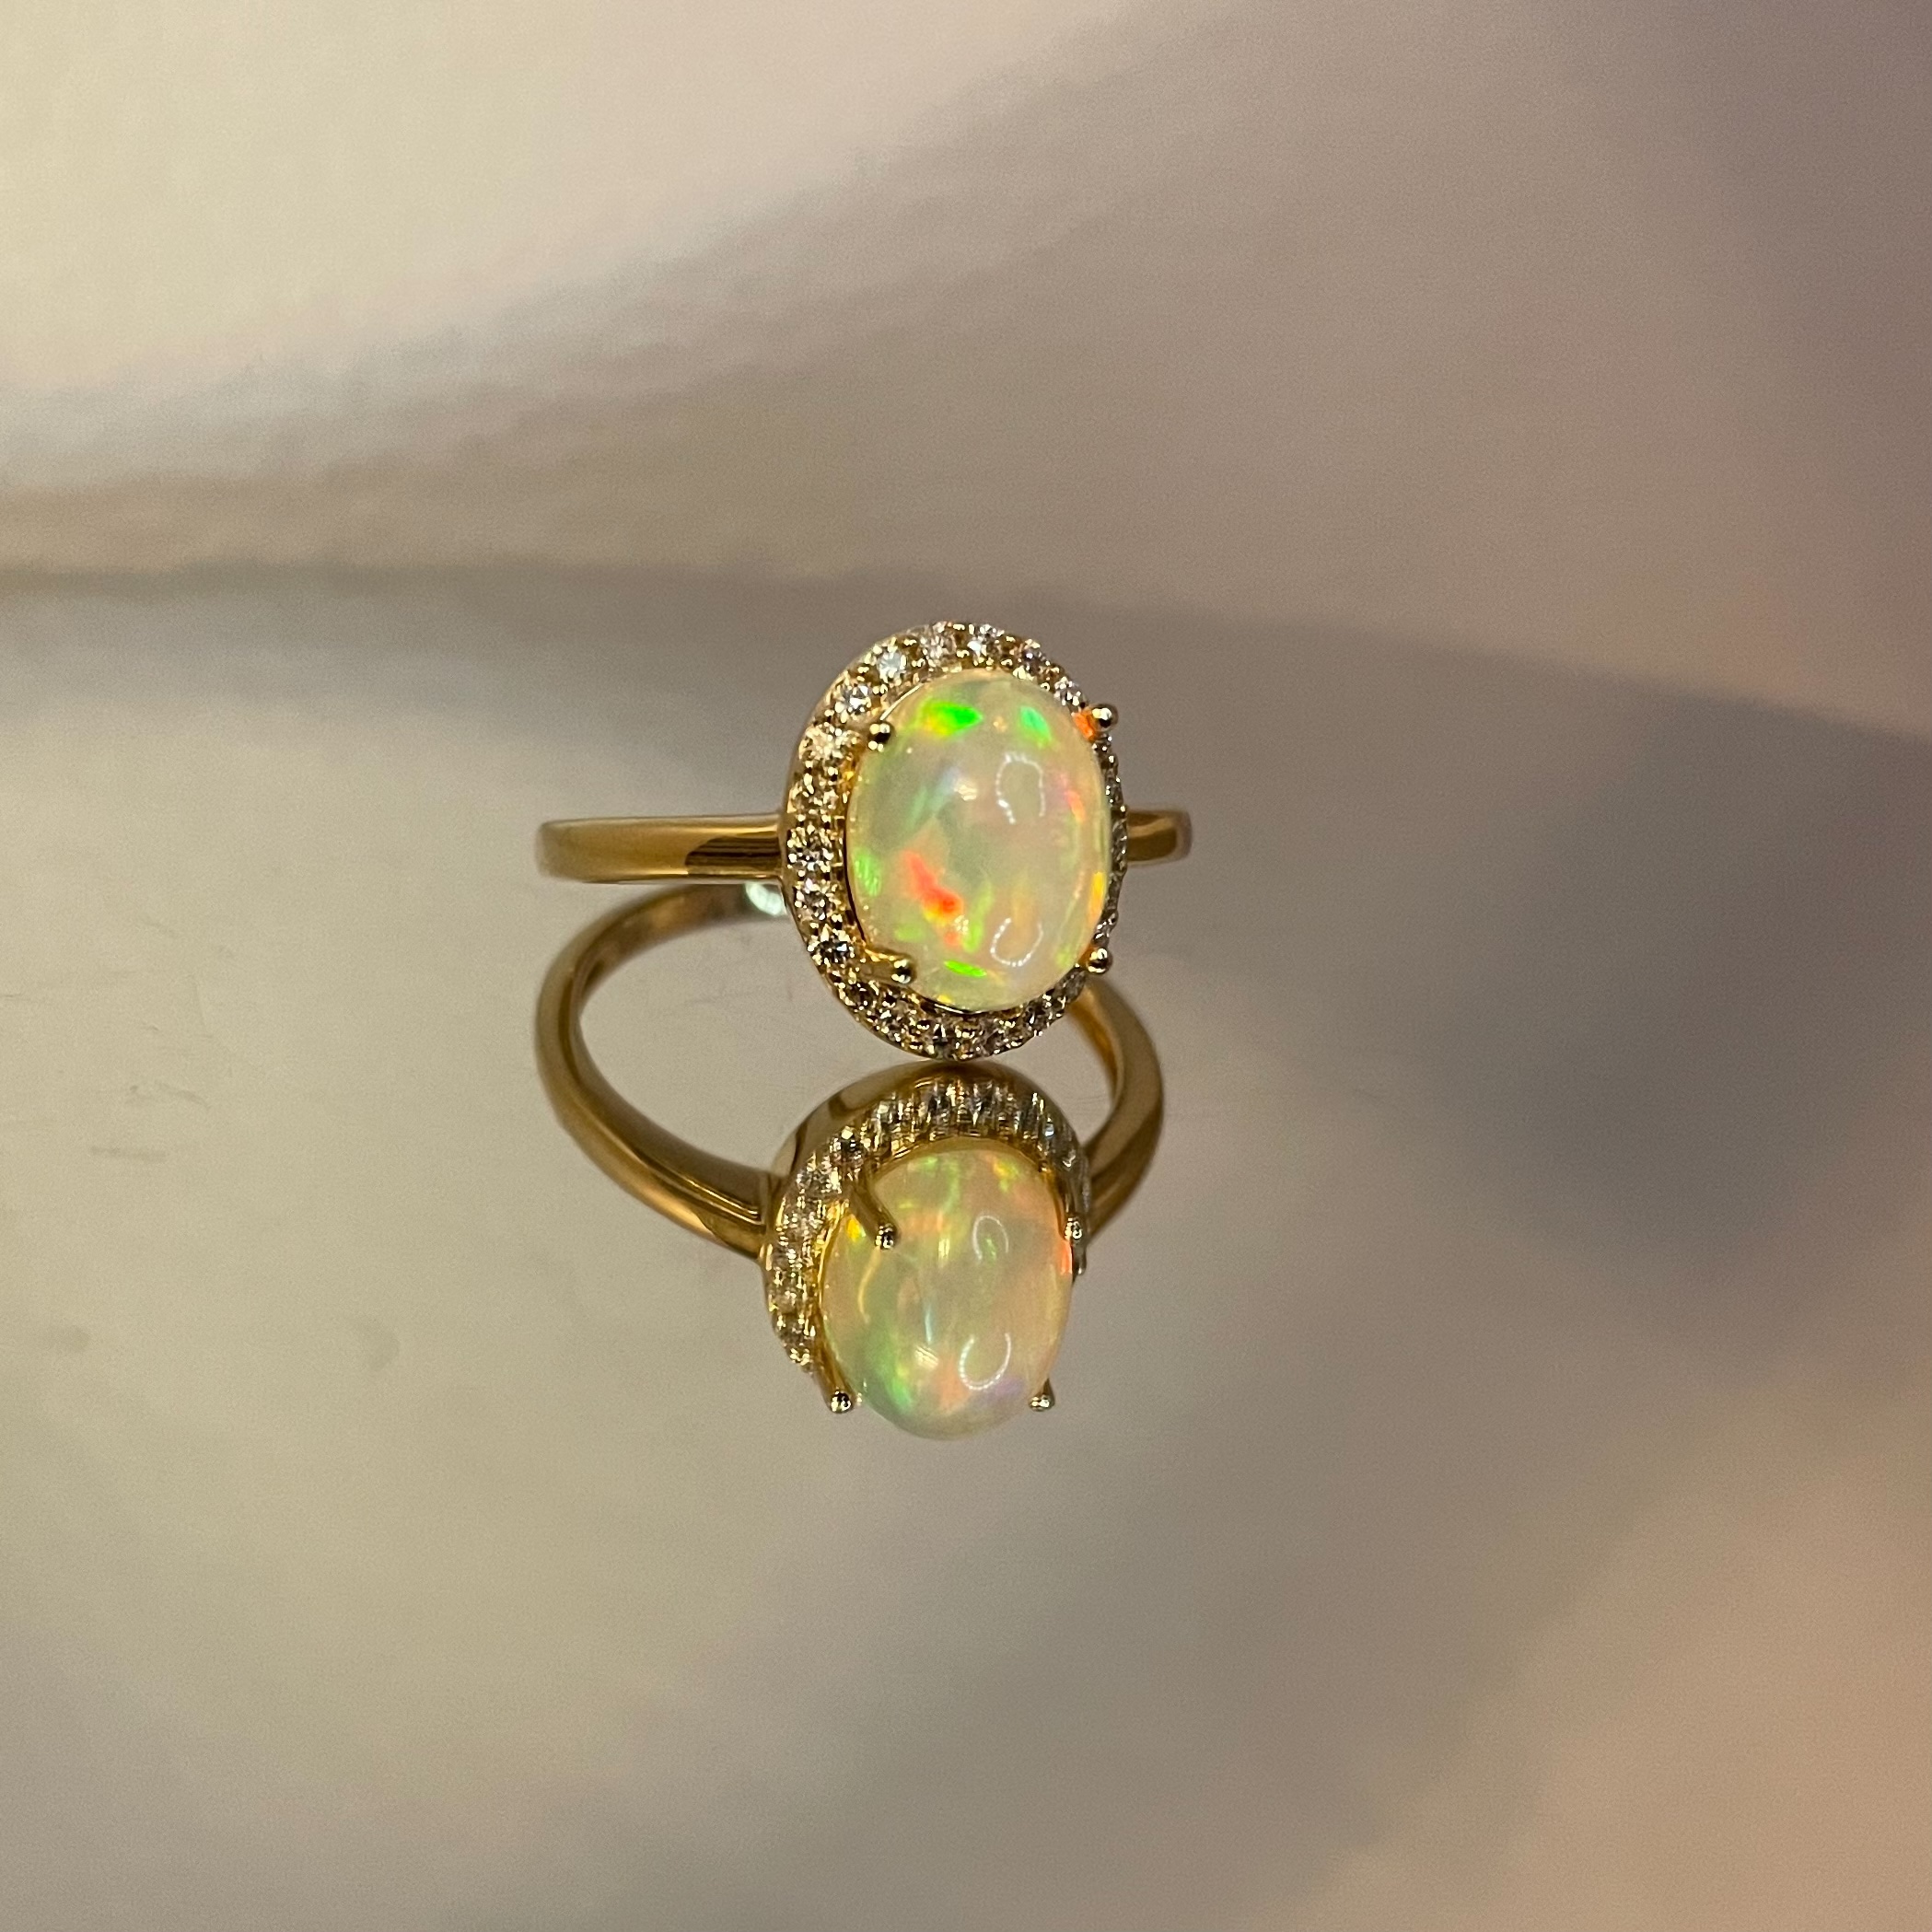 Beautiful Natural Opal Ring With Diamonds And 18k Gold - Image 4 of 6